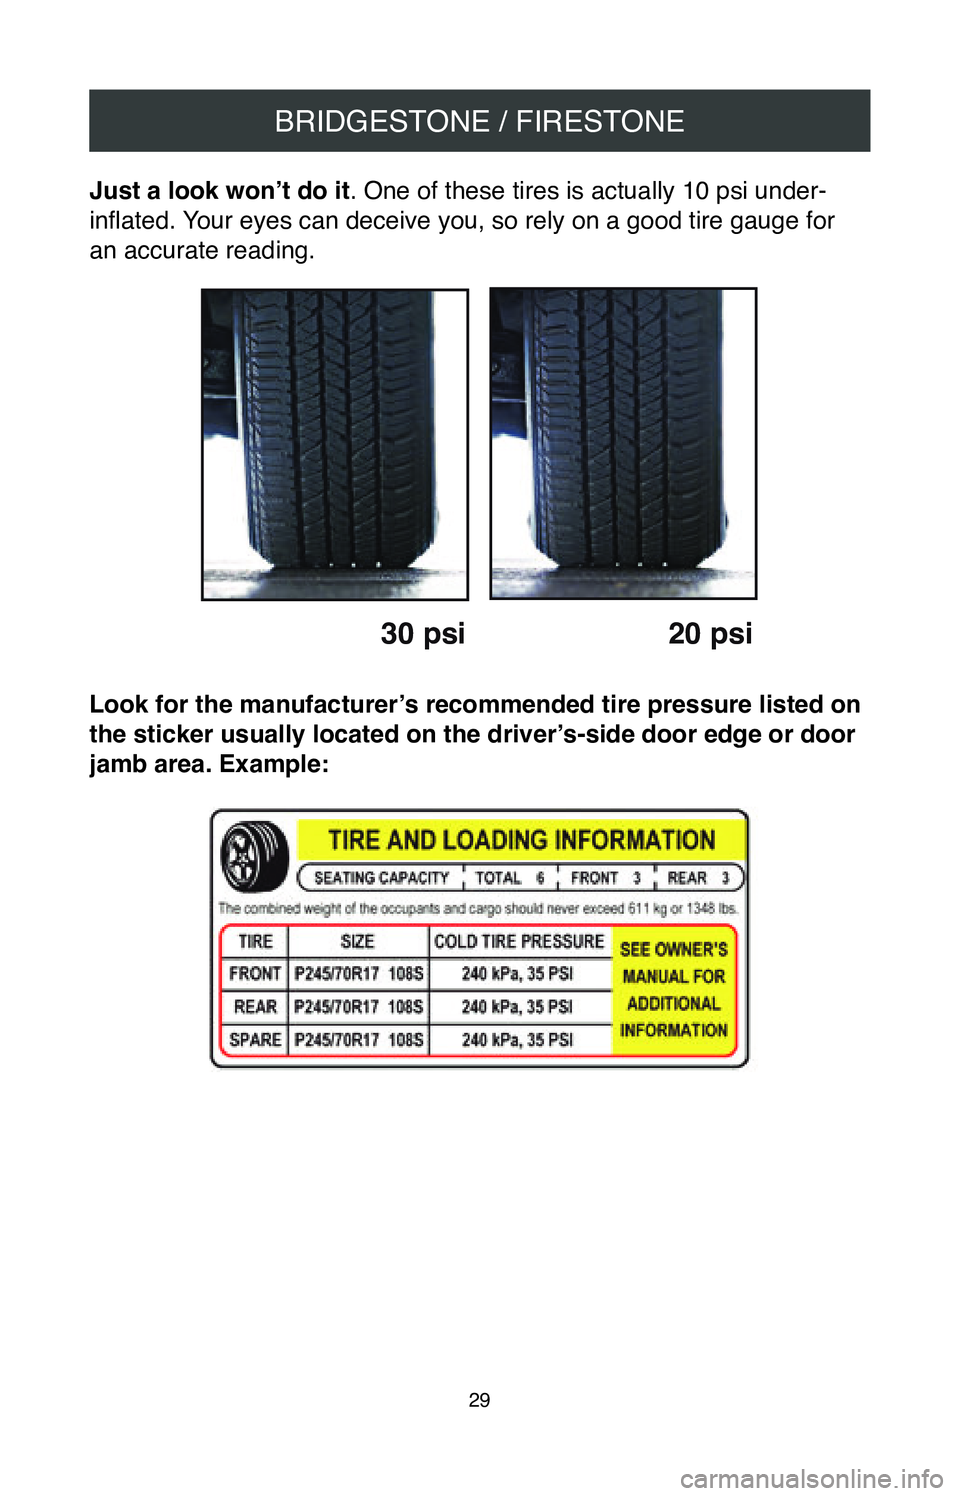 TOYOTA PRIUS 2020  Warranties & Maintenance Guides (in English) BRIDGESTONE / FIRESTONE
29
Just a look won’t do it. One of these tires is actually 10 psi under-
inflated. Your eyes can deceive you, so rely on a good tire gauge for   
an accurate reading.
30 psi 